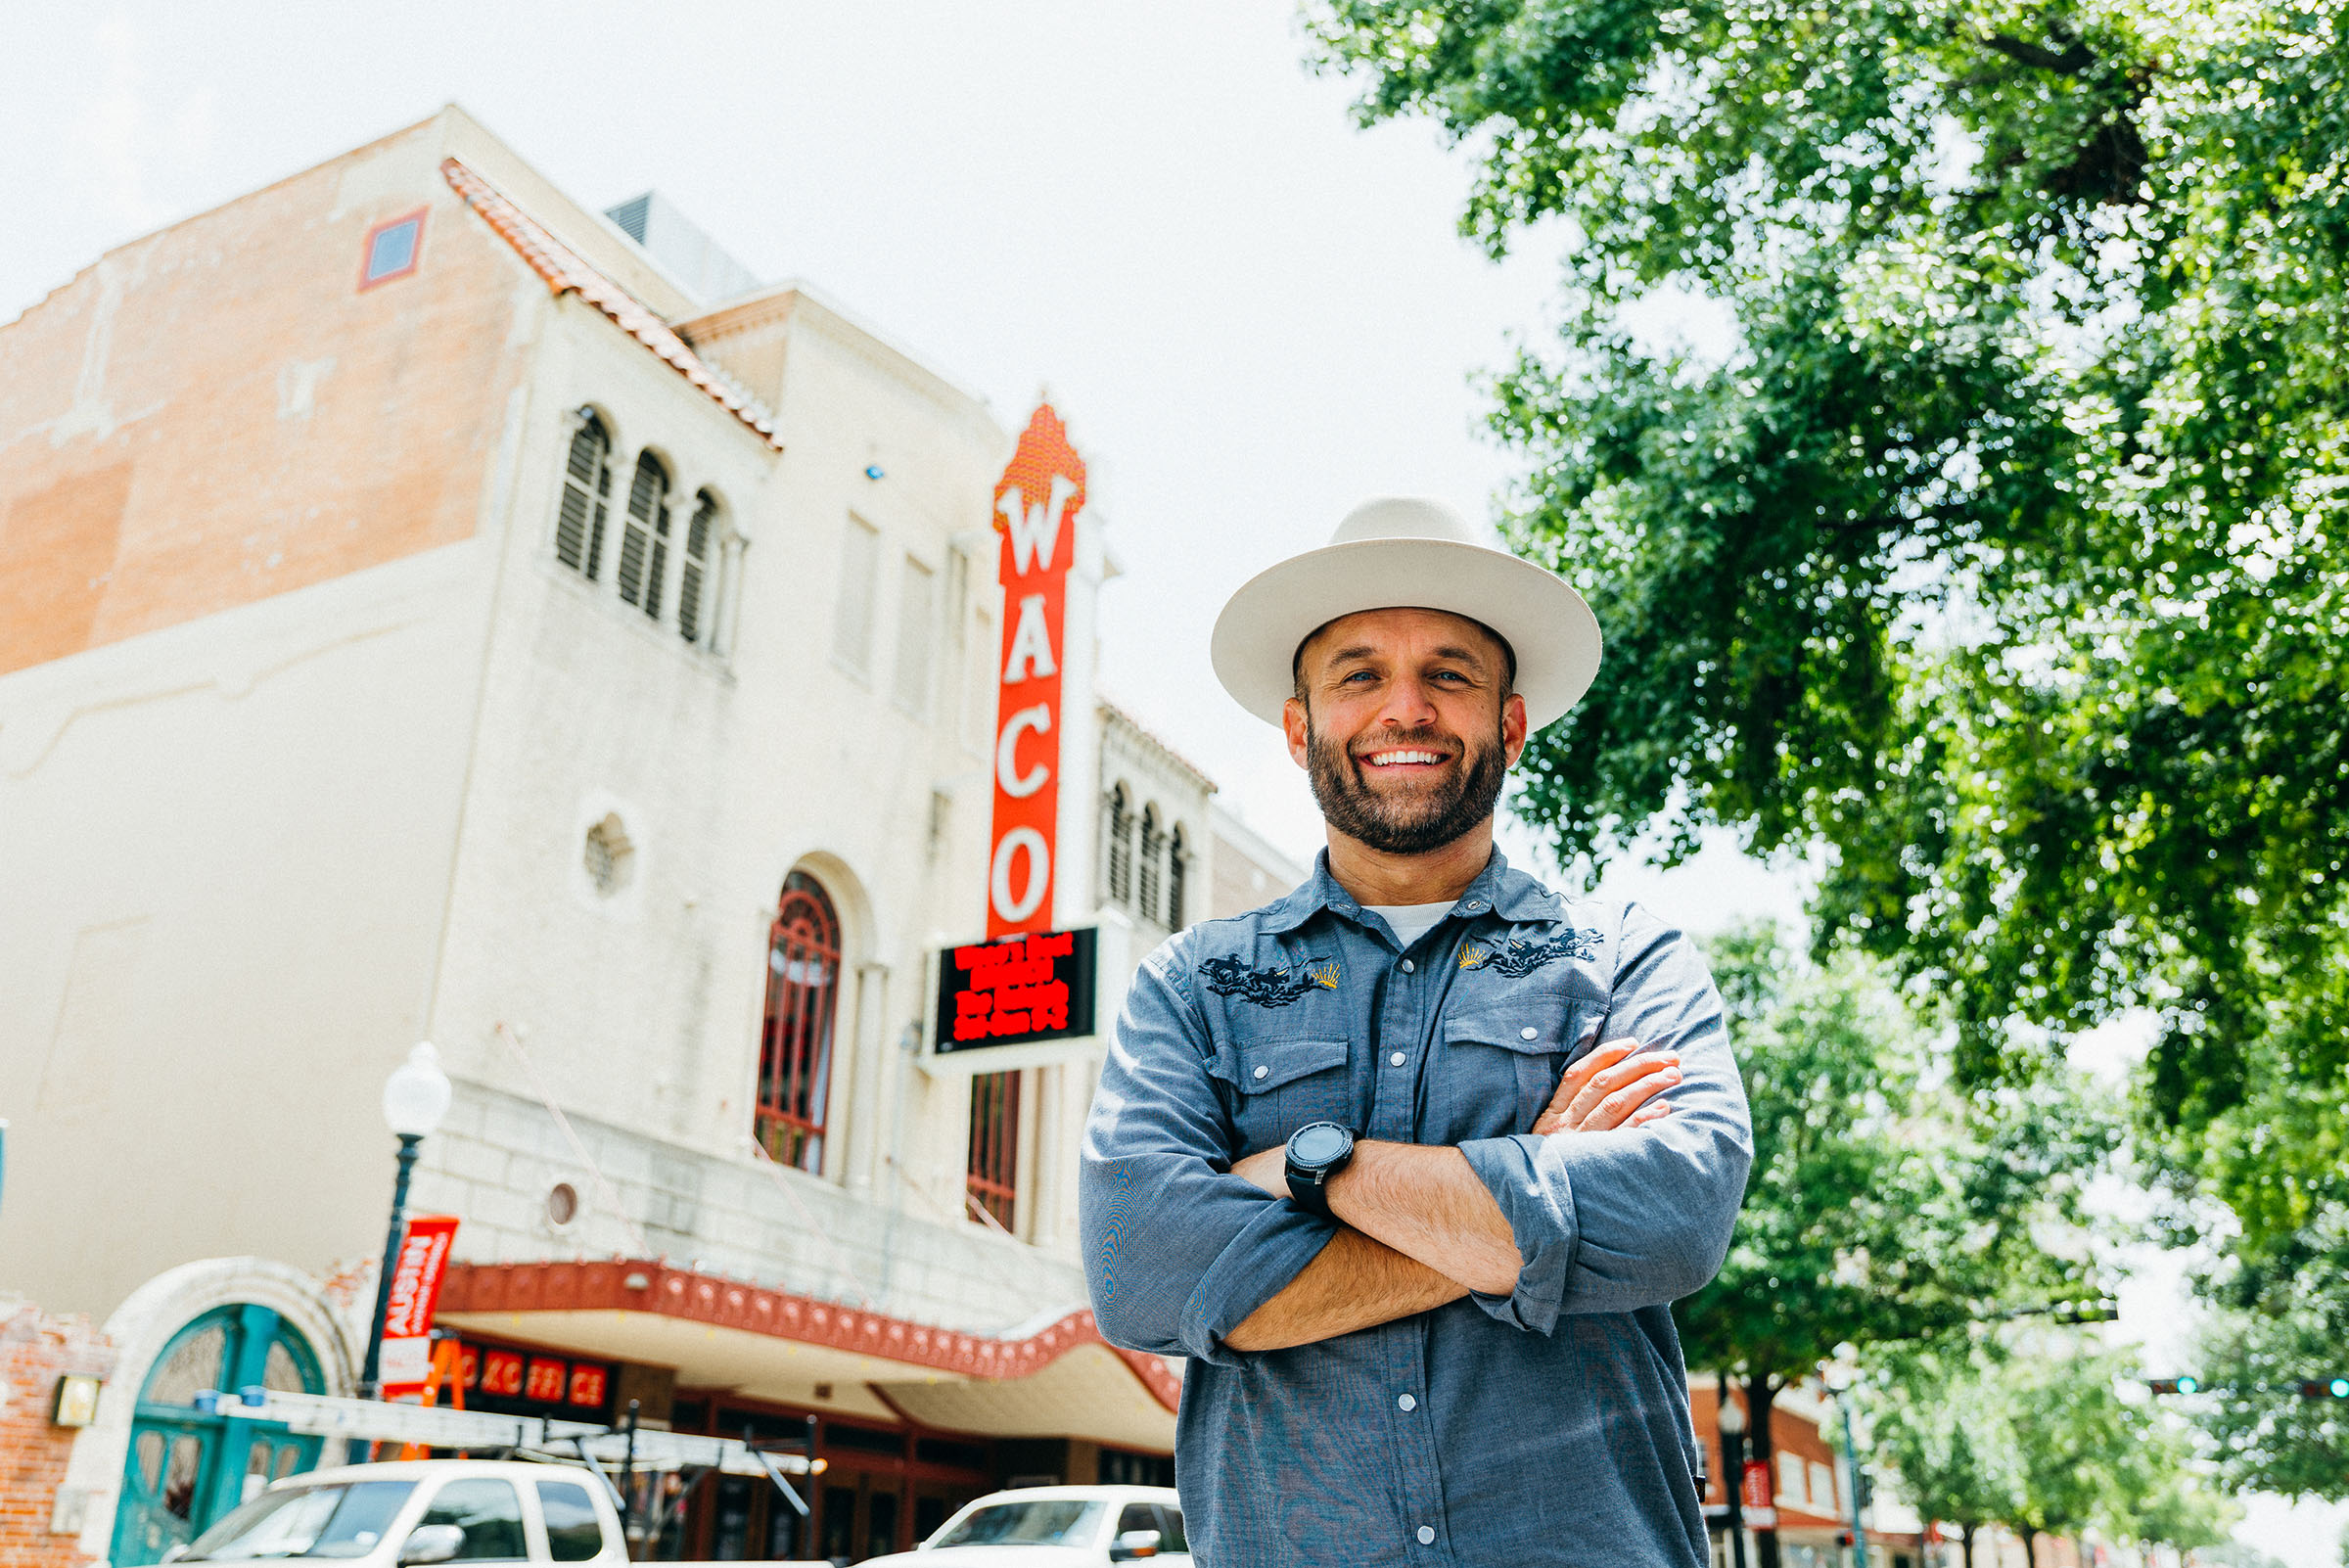 A man in a blue button-down shirt and small cowboy hat stands with his arms crossed in front of a theater with a red "Waco" sign on the front